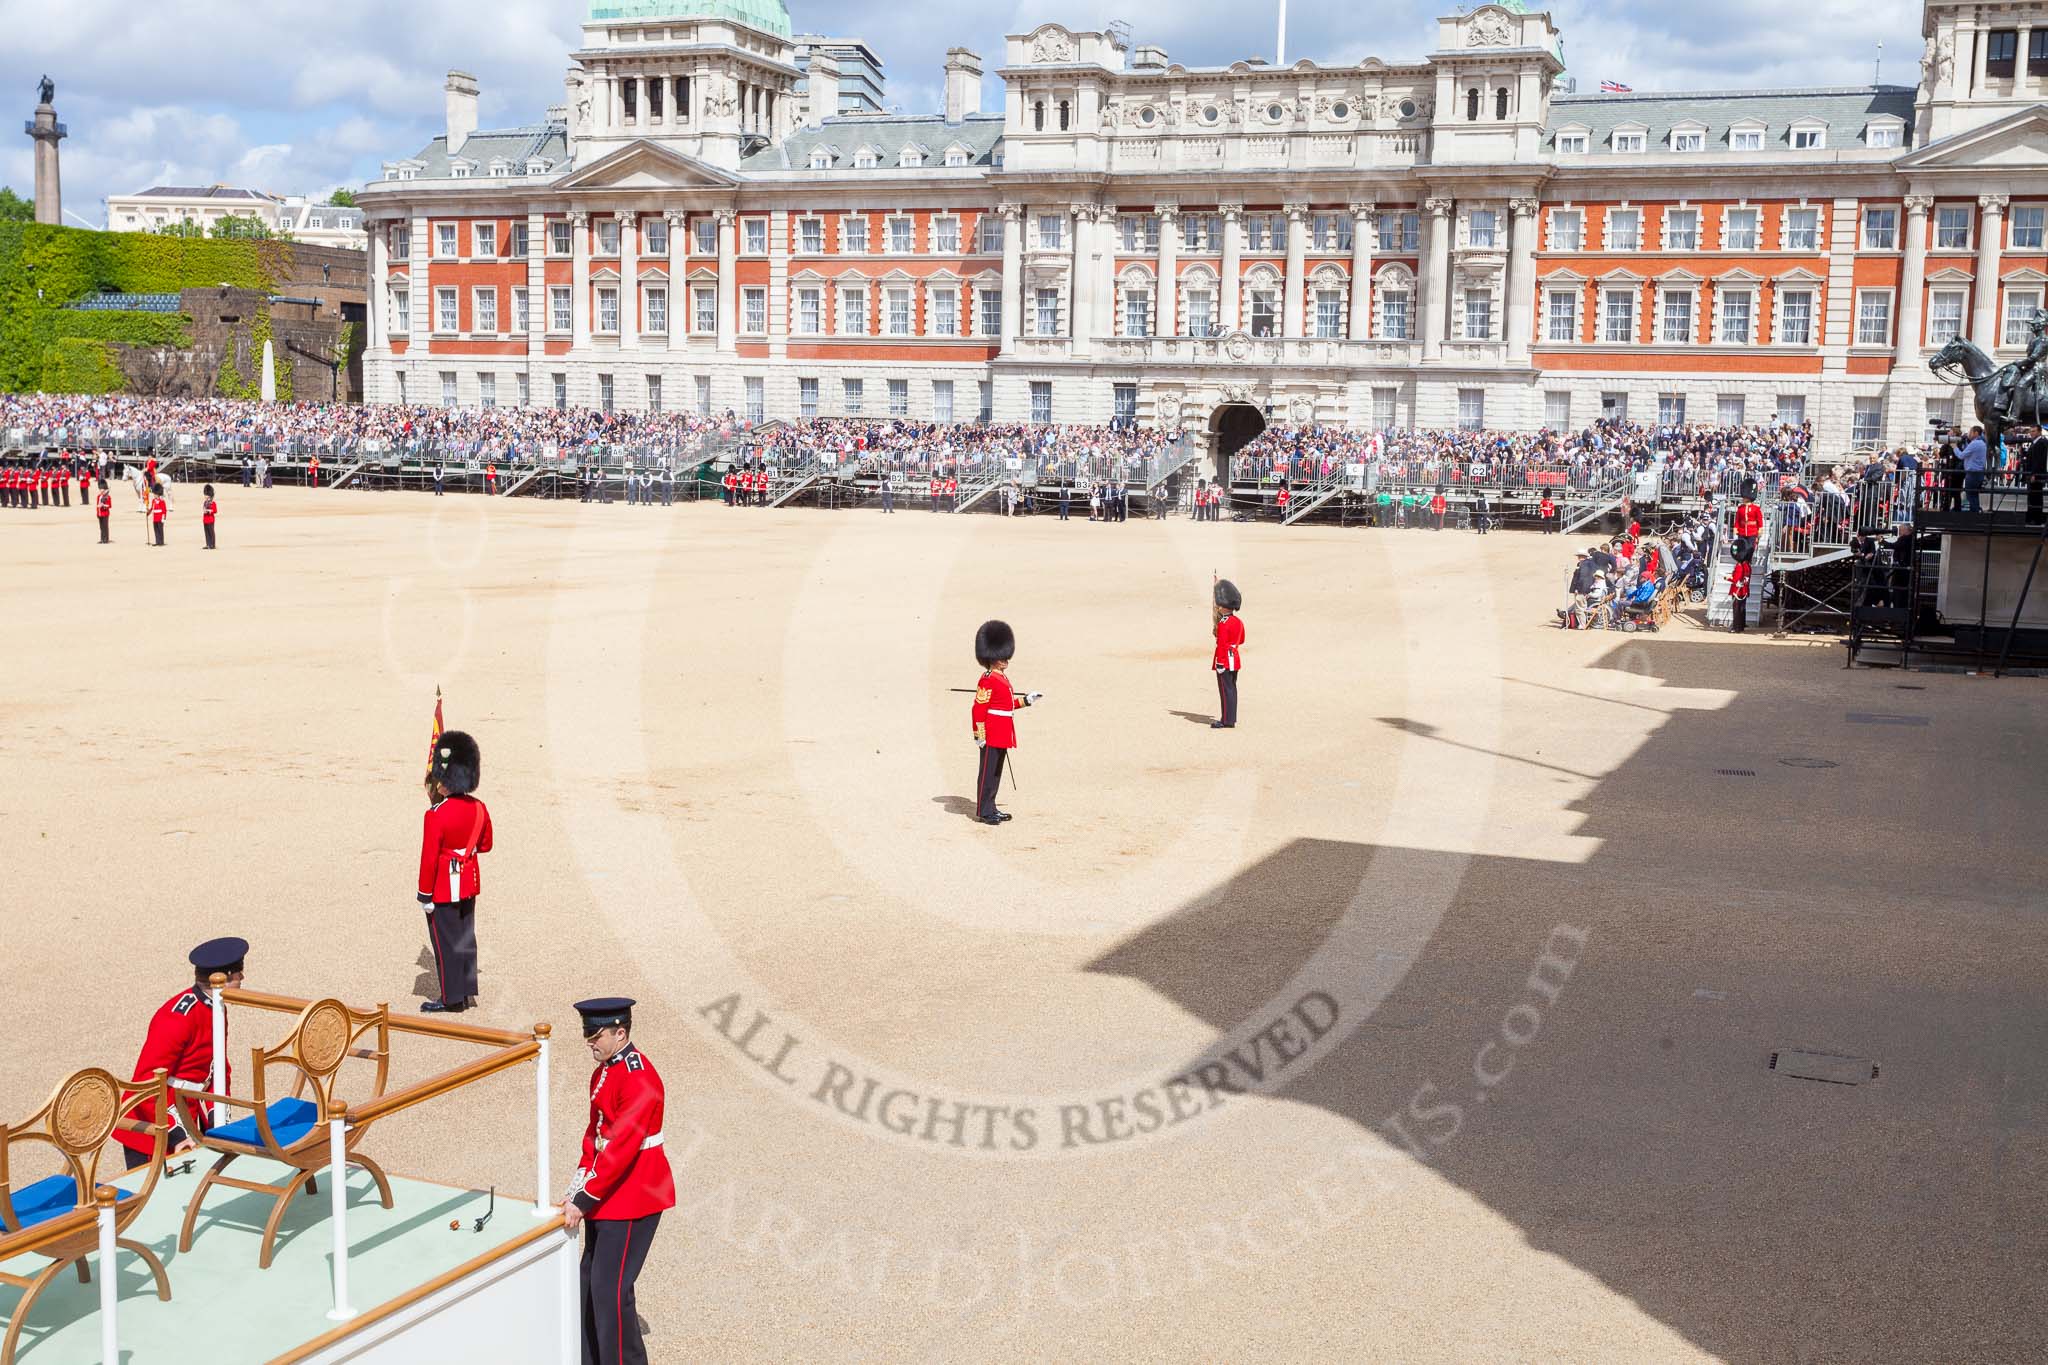 The Colonel's Review 2015.
Horse Guards Parade, Westminster,
London,

United Kingdom,
on 06 June 2015 at 10:52, image #152